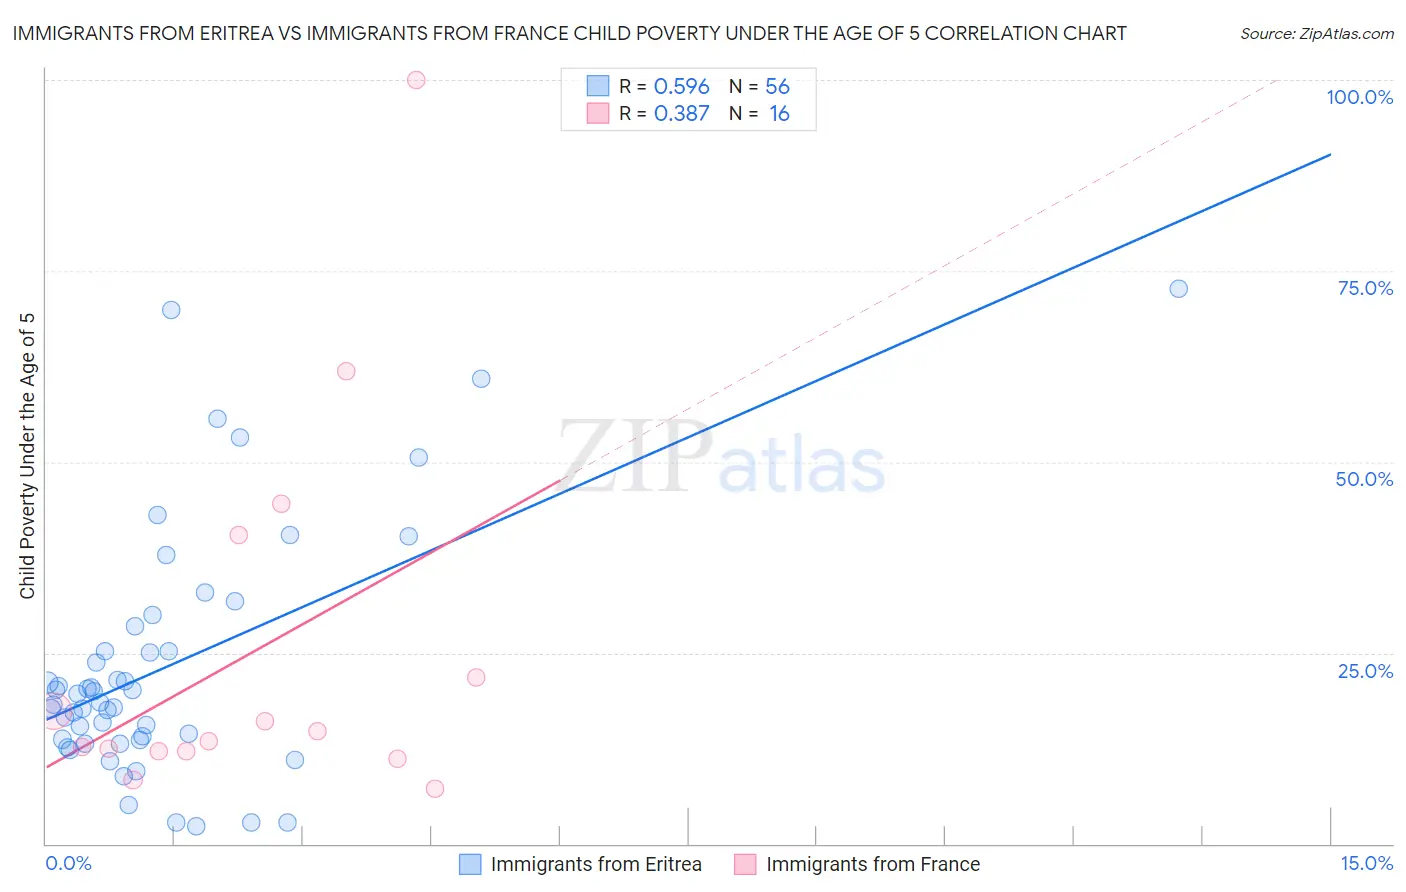 Immigrants from Eritrea vs Immigrants from France Child Poverty Under the Age of 5